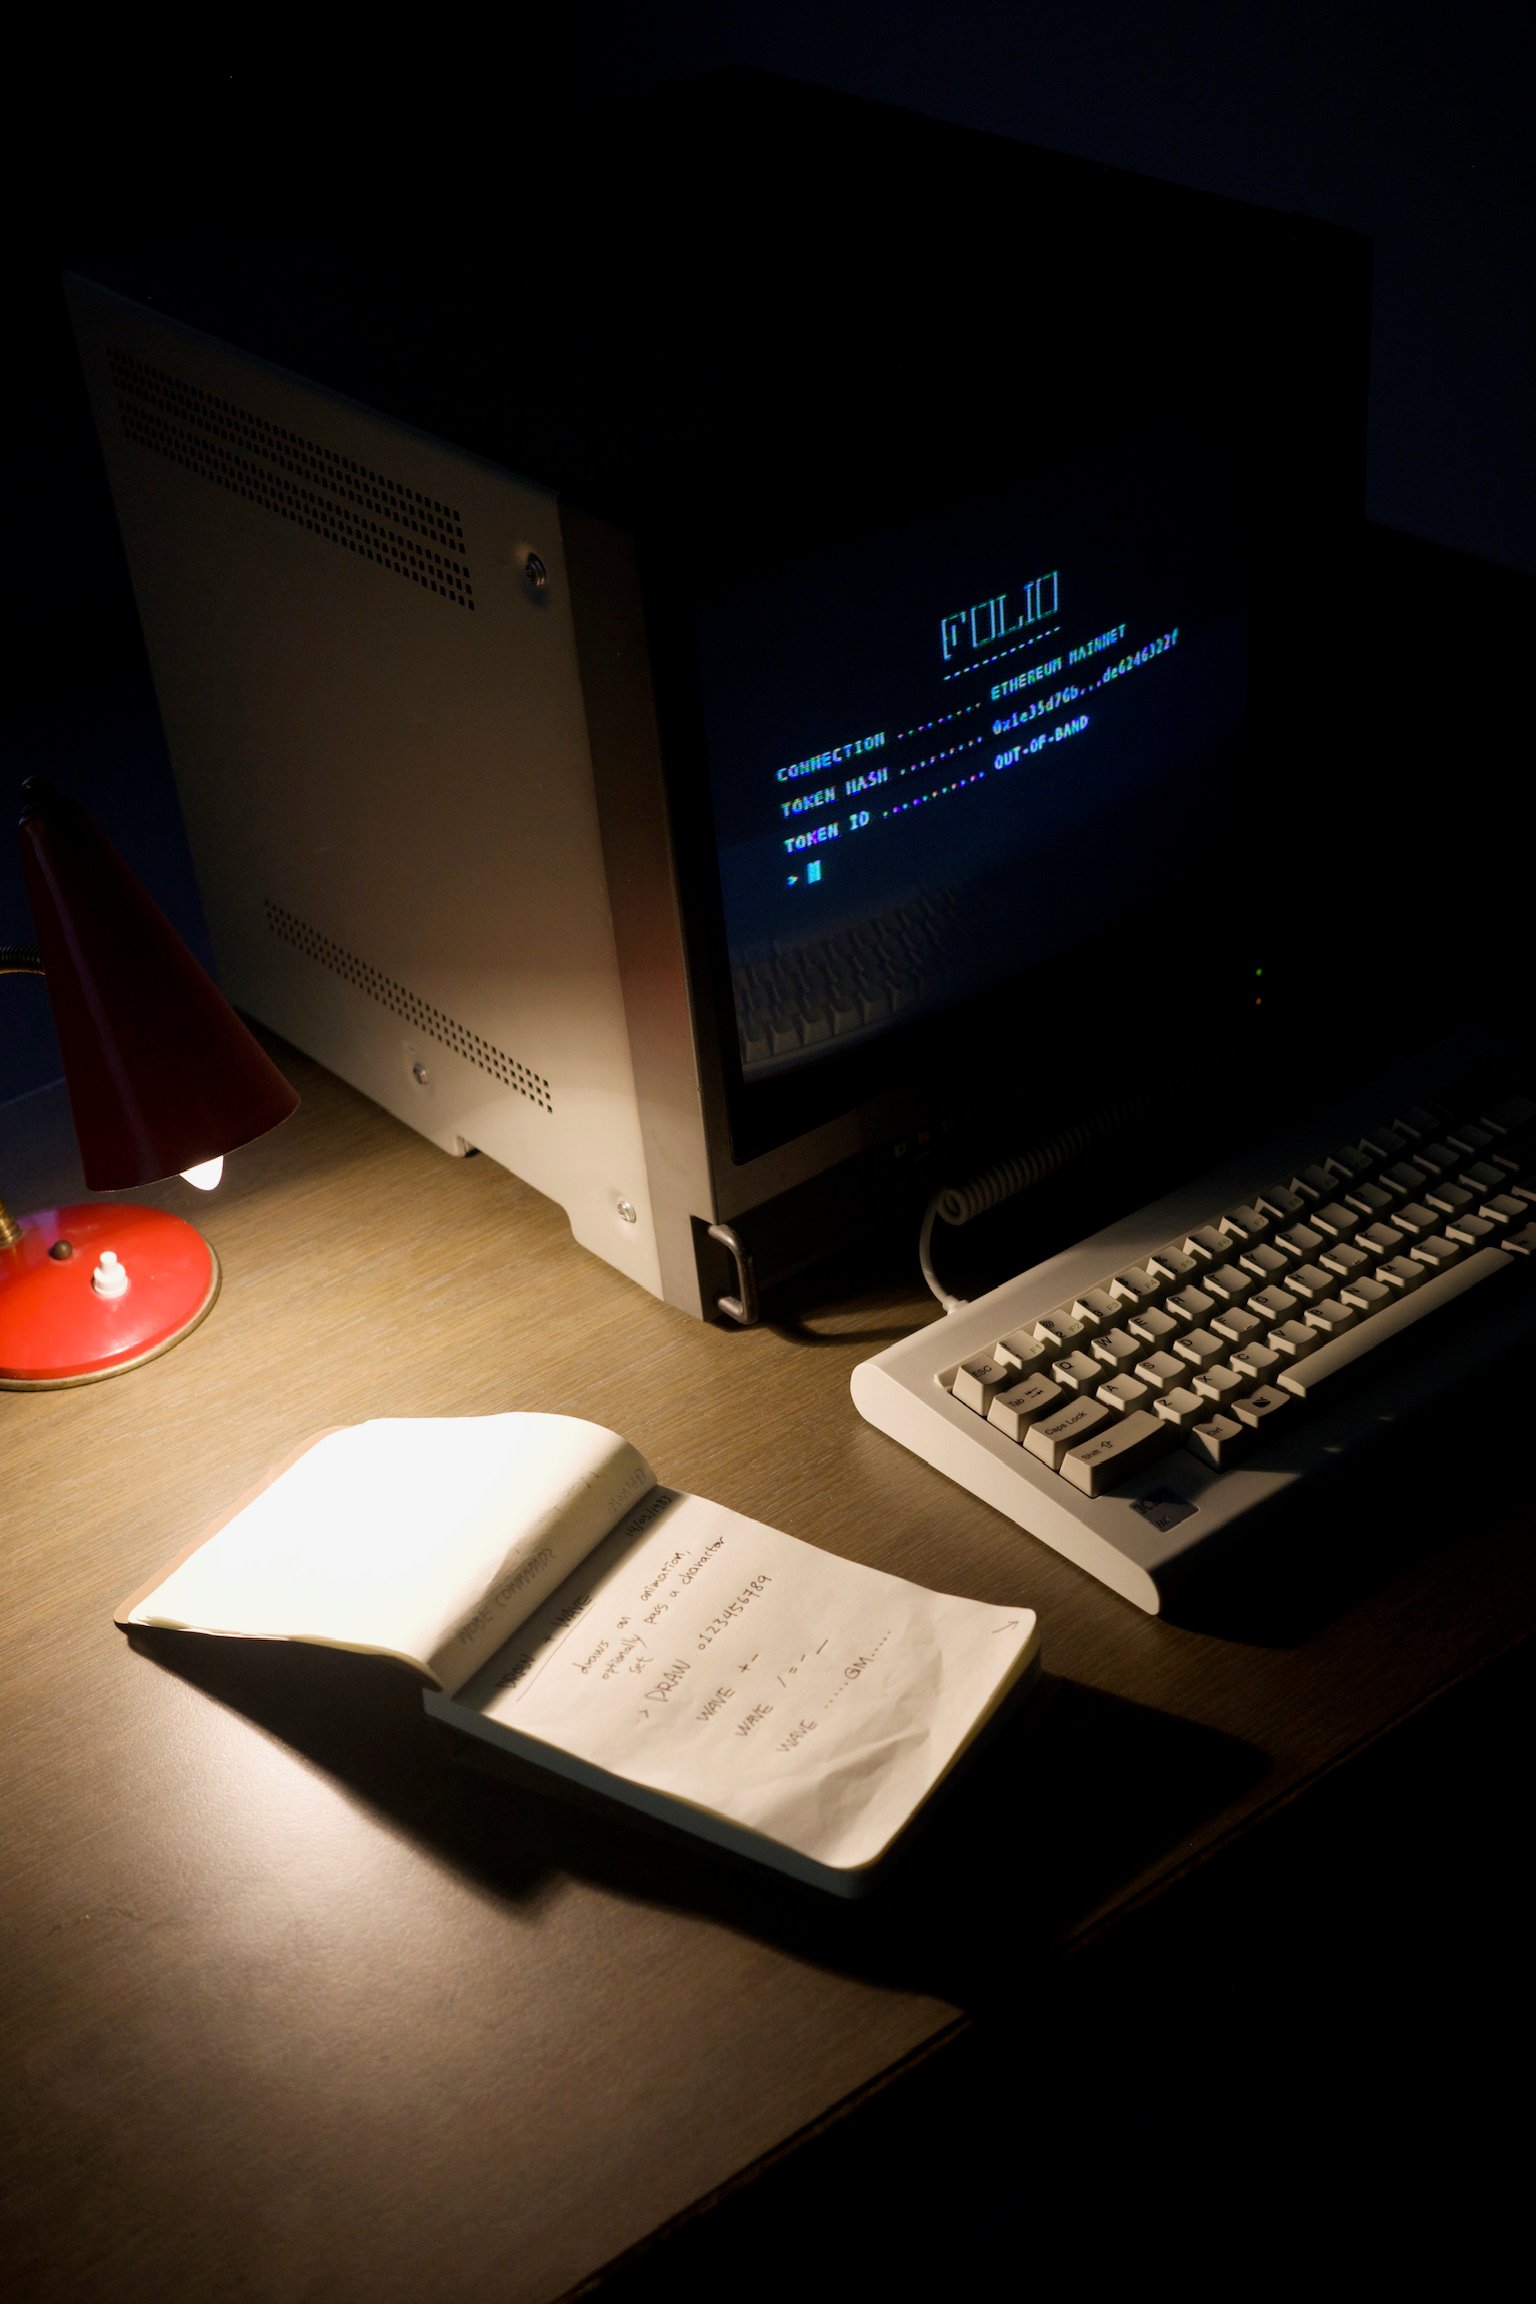 An old school computer monitor showing a terminal, a mechanical keyboard, a lamp, and a notebook listing commands, in a dimly lit room.